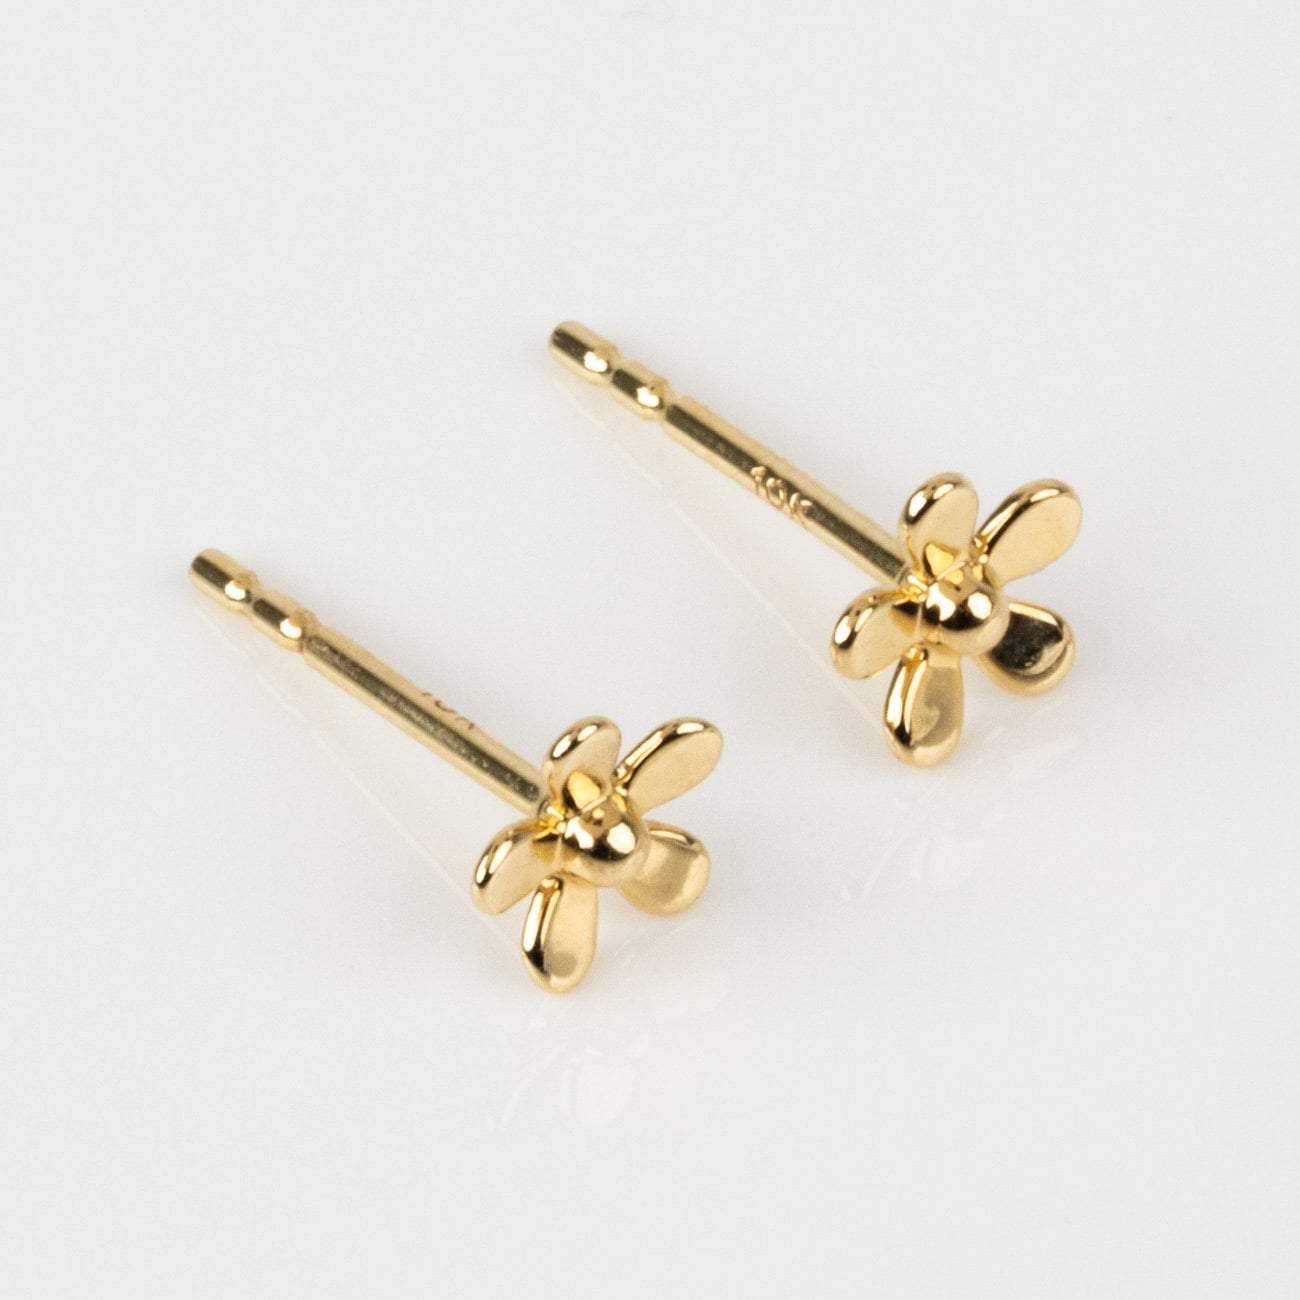 Solid Yellow Gold Daisy Stud Earrings Family Gold Floral Fine Jewelry